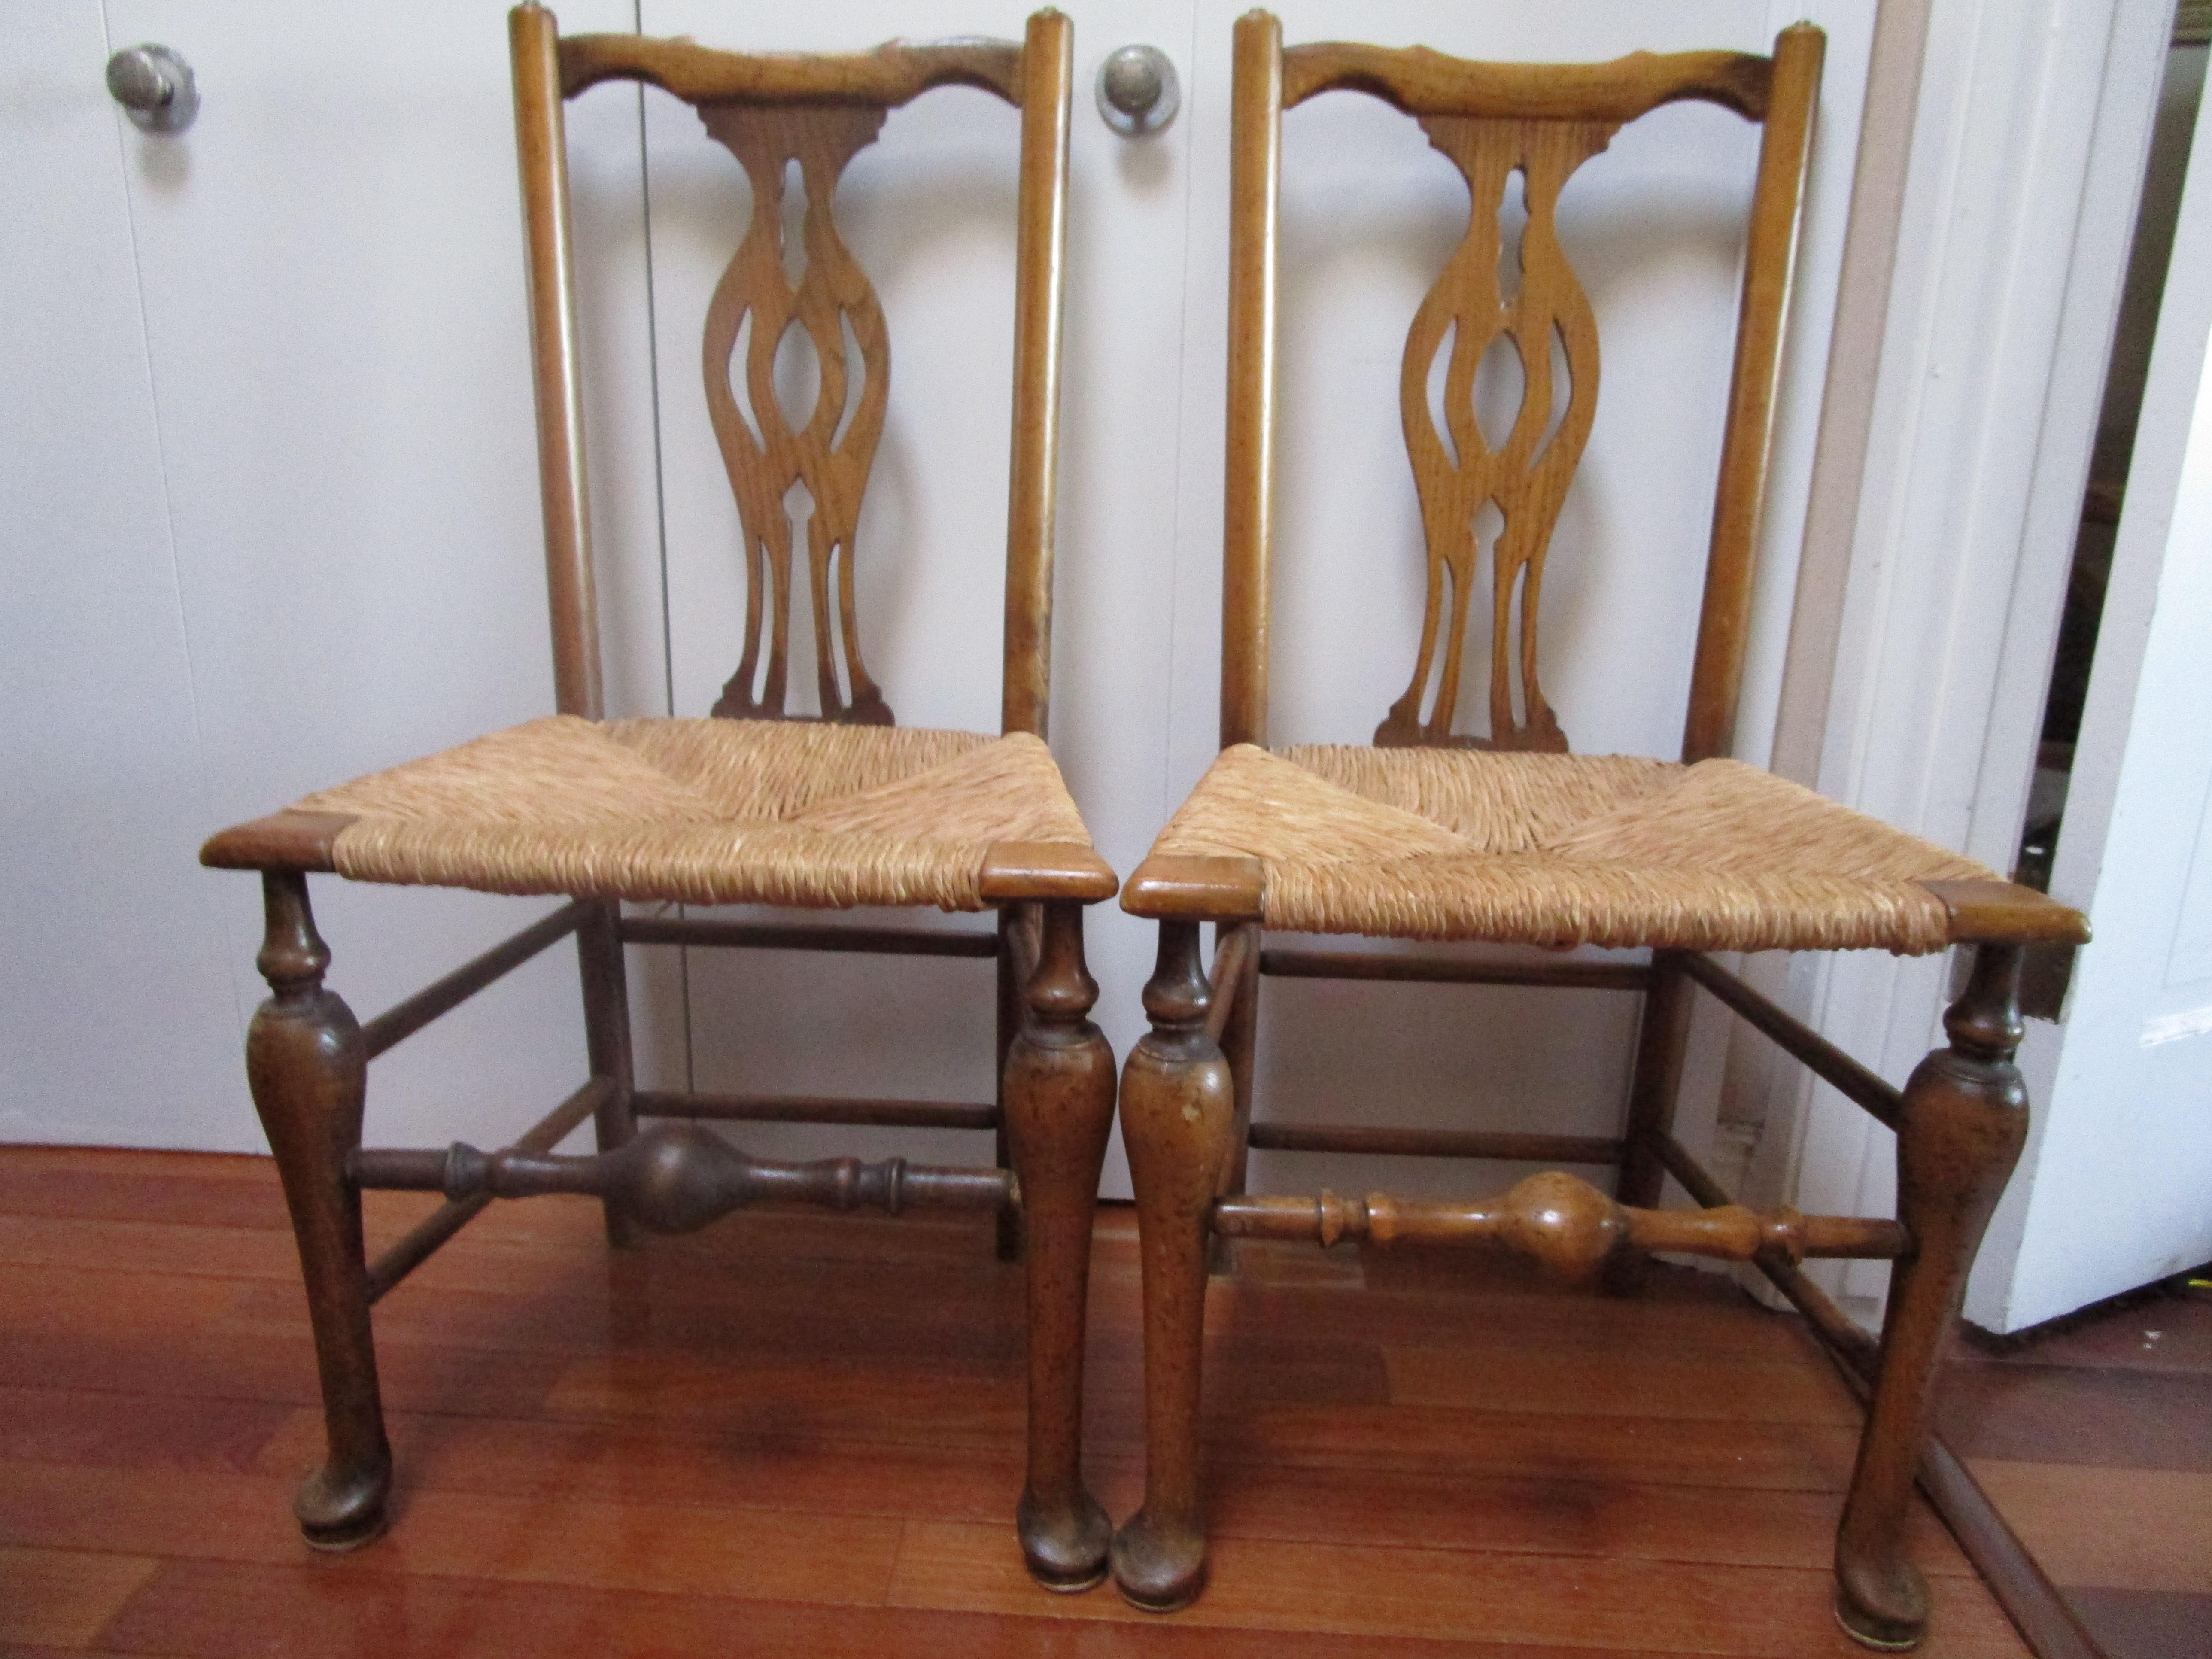 This pair of 19th Century Queen Anne side chairs with rush seats are in fine condition. This pair presents so beautifully with the maple wood, which has developed a fine patina over the years. The pair of chairs feature oak and maple. They are